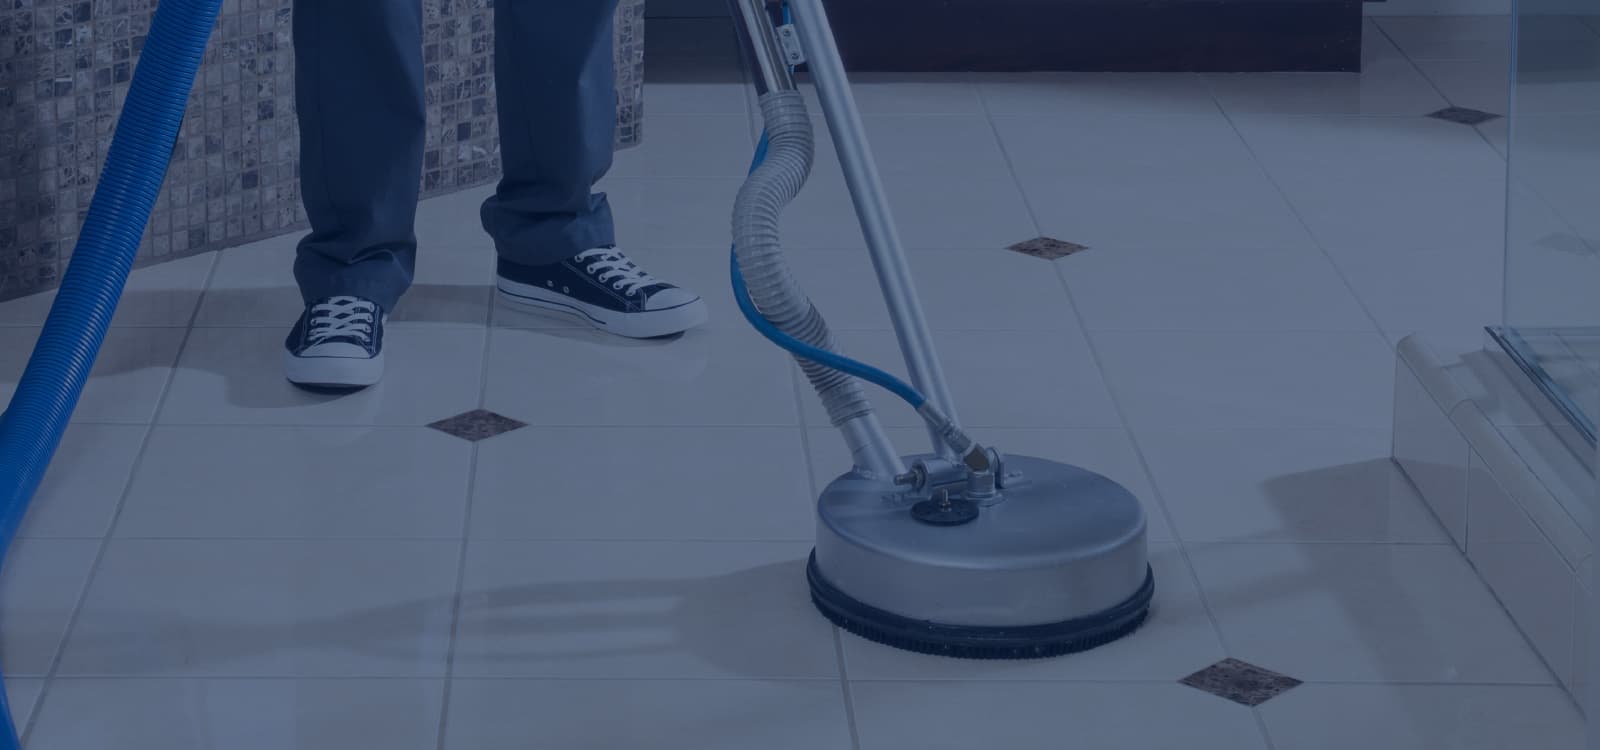 Tile cleaning dallas